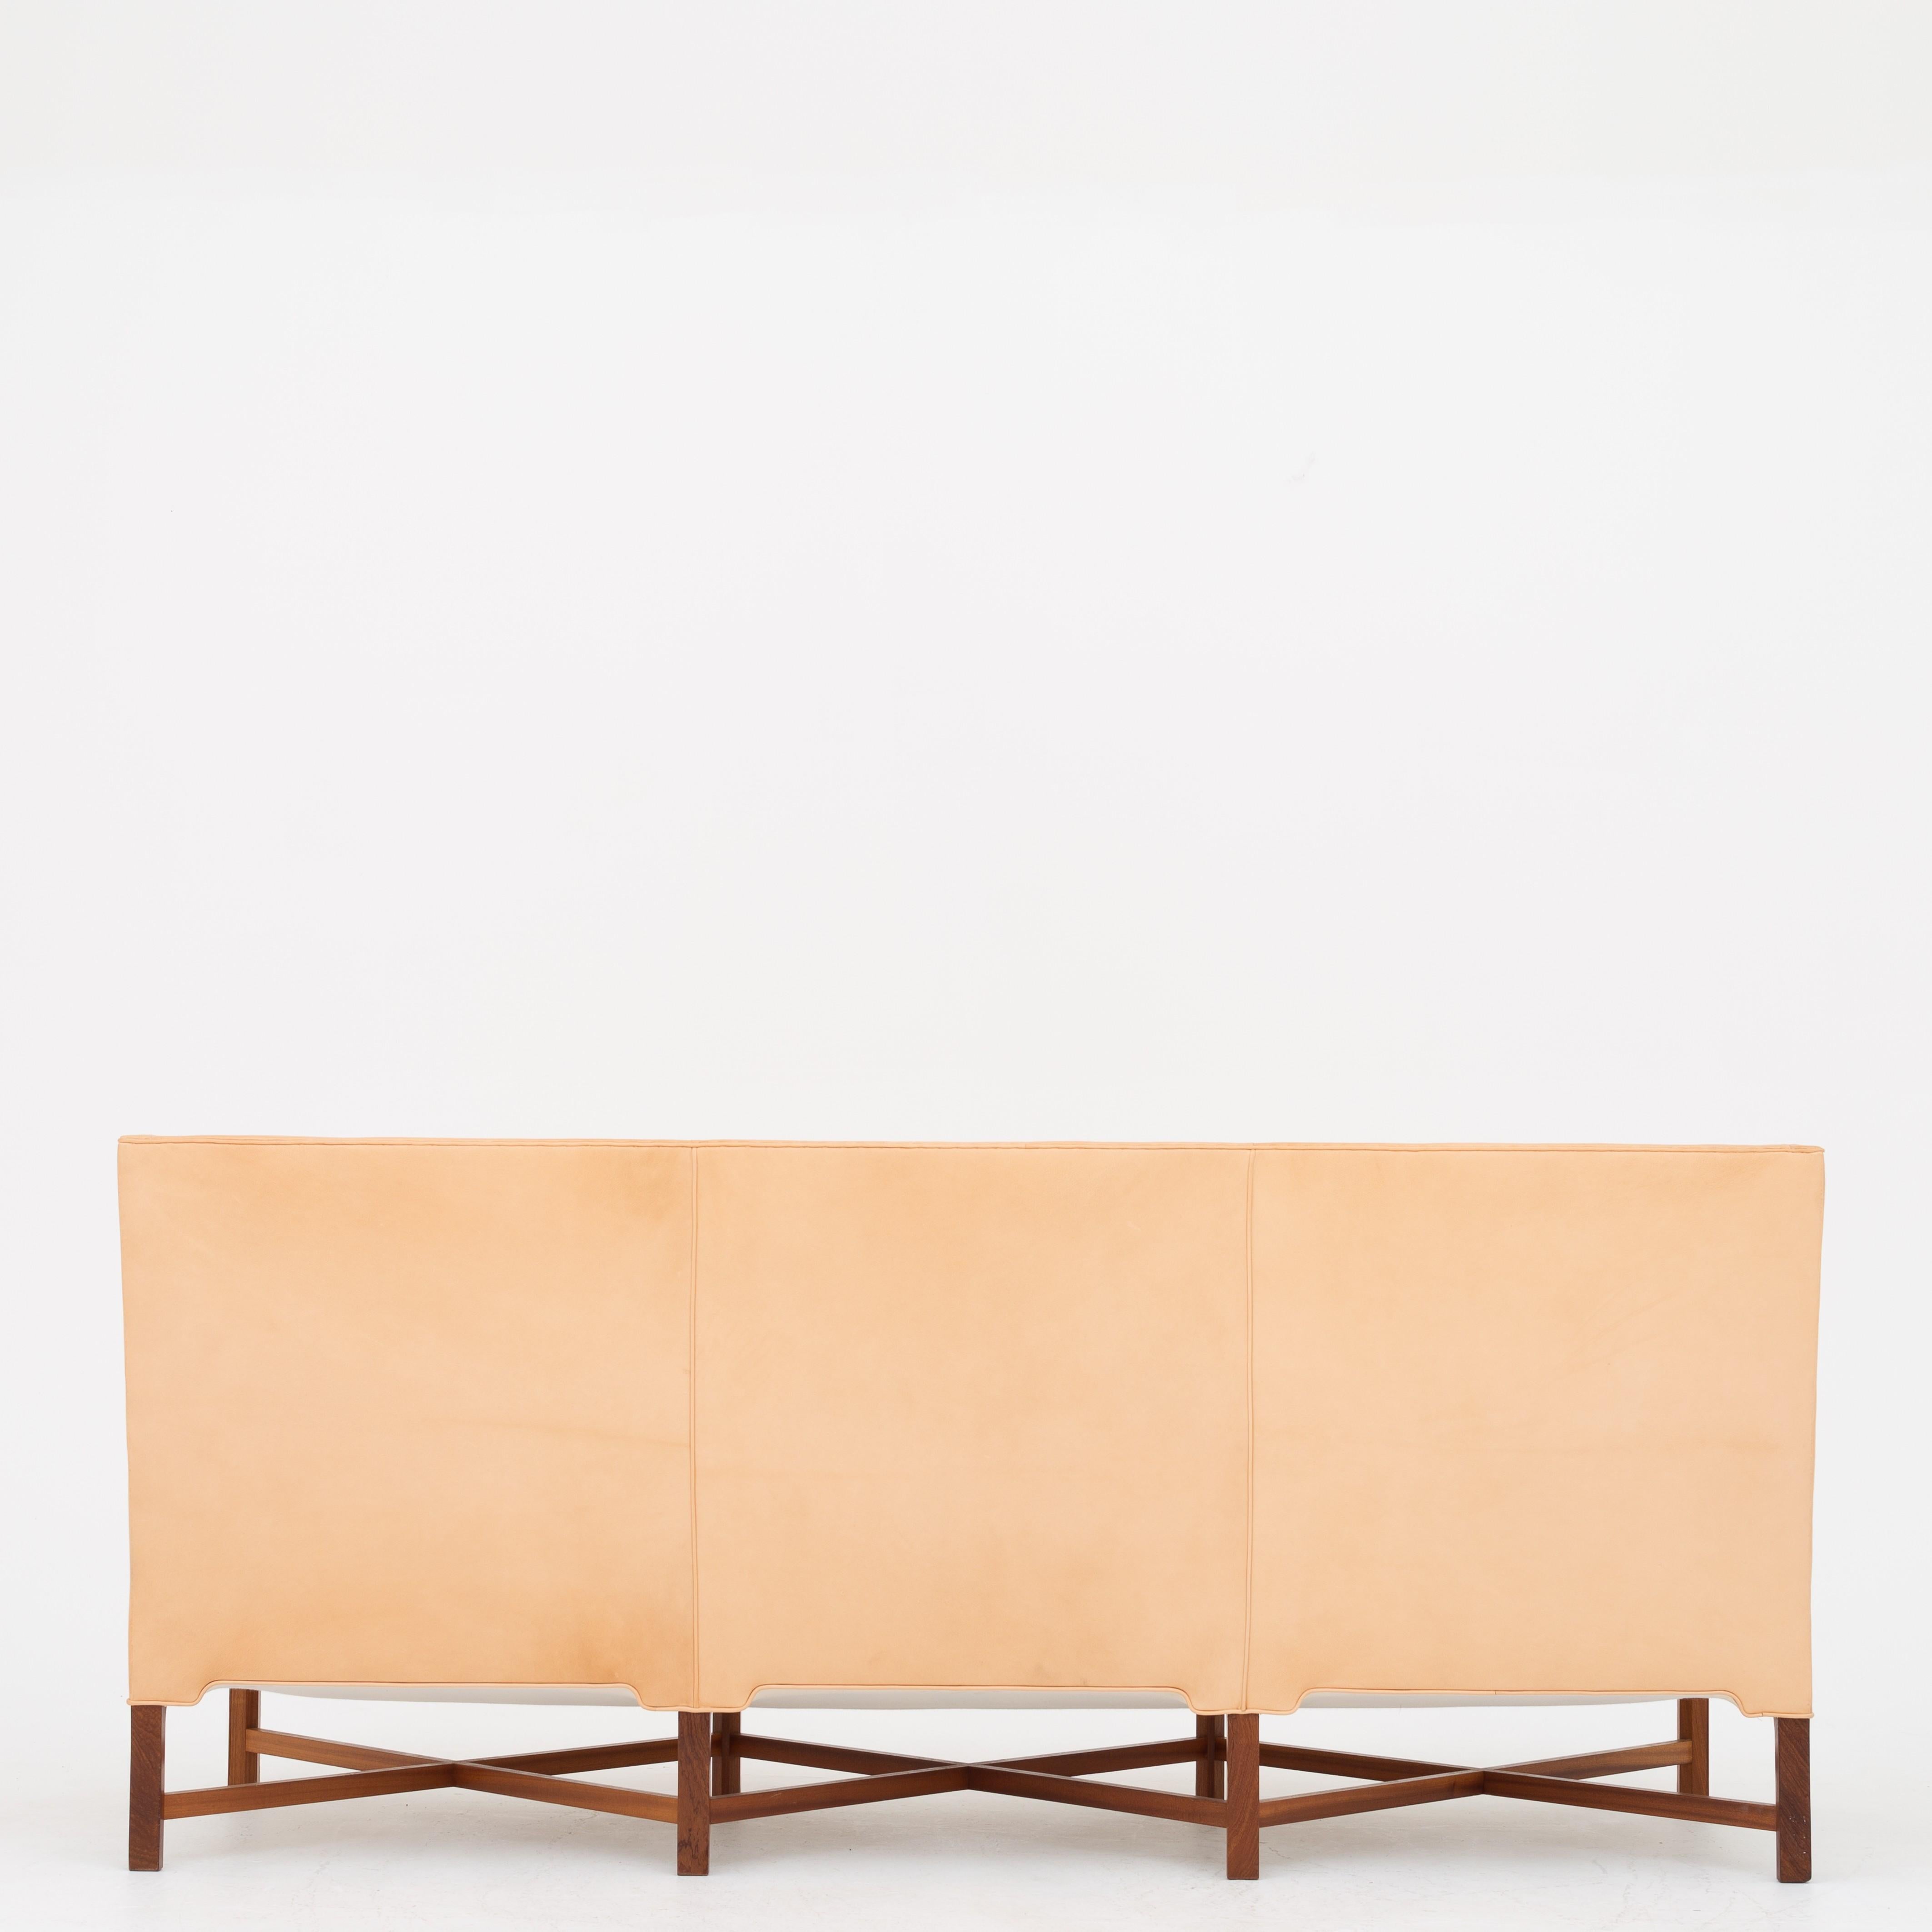 KK 4118, 3-seat sofa with solid mahogany crossed legs and new niger leather. Designed in 1929. Maker Rud. Rasmussen.